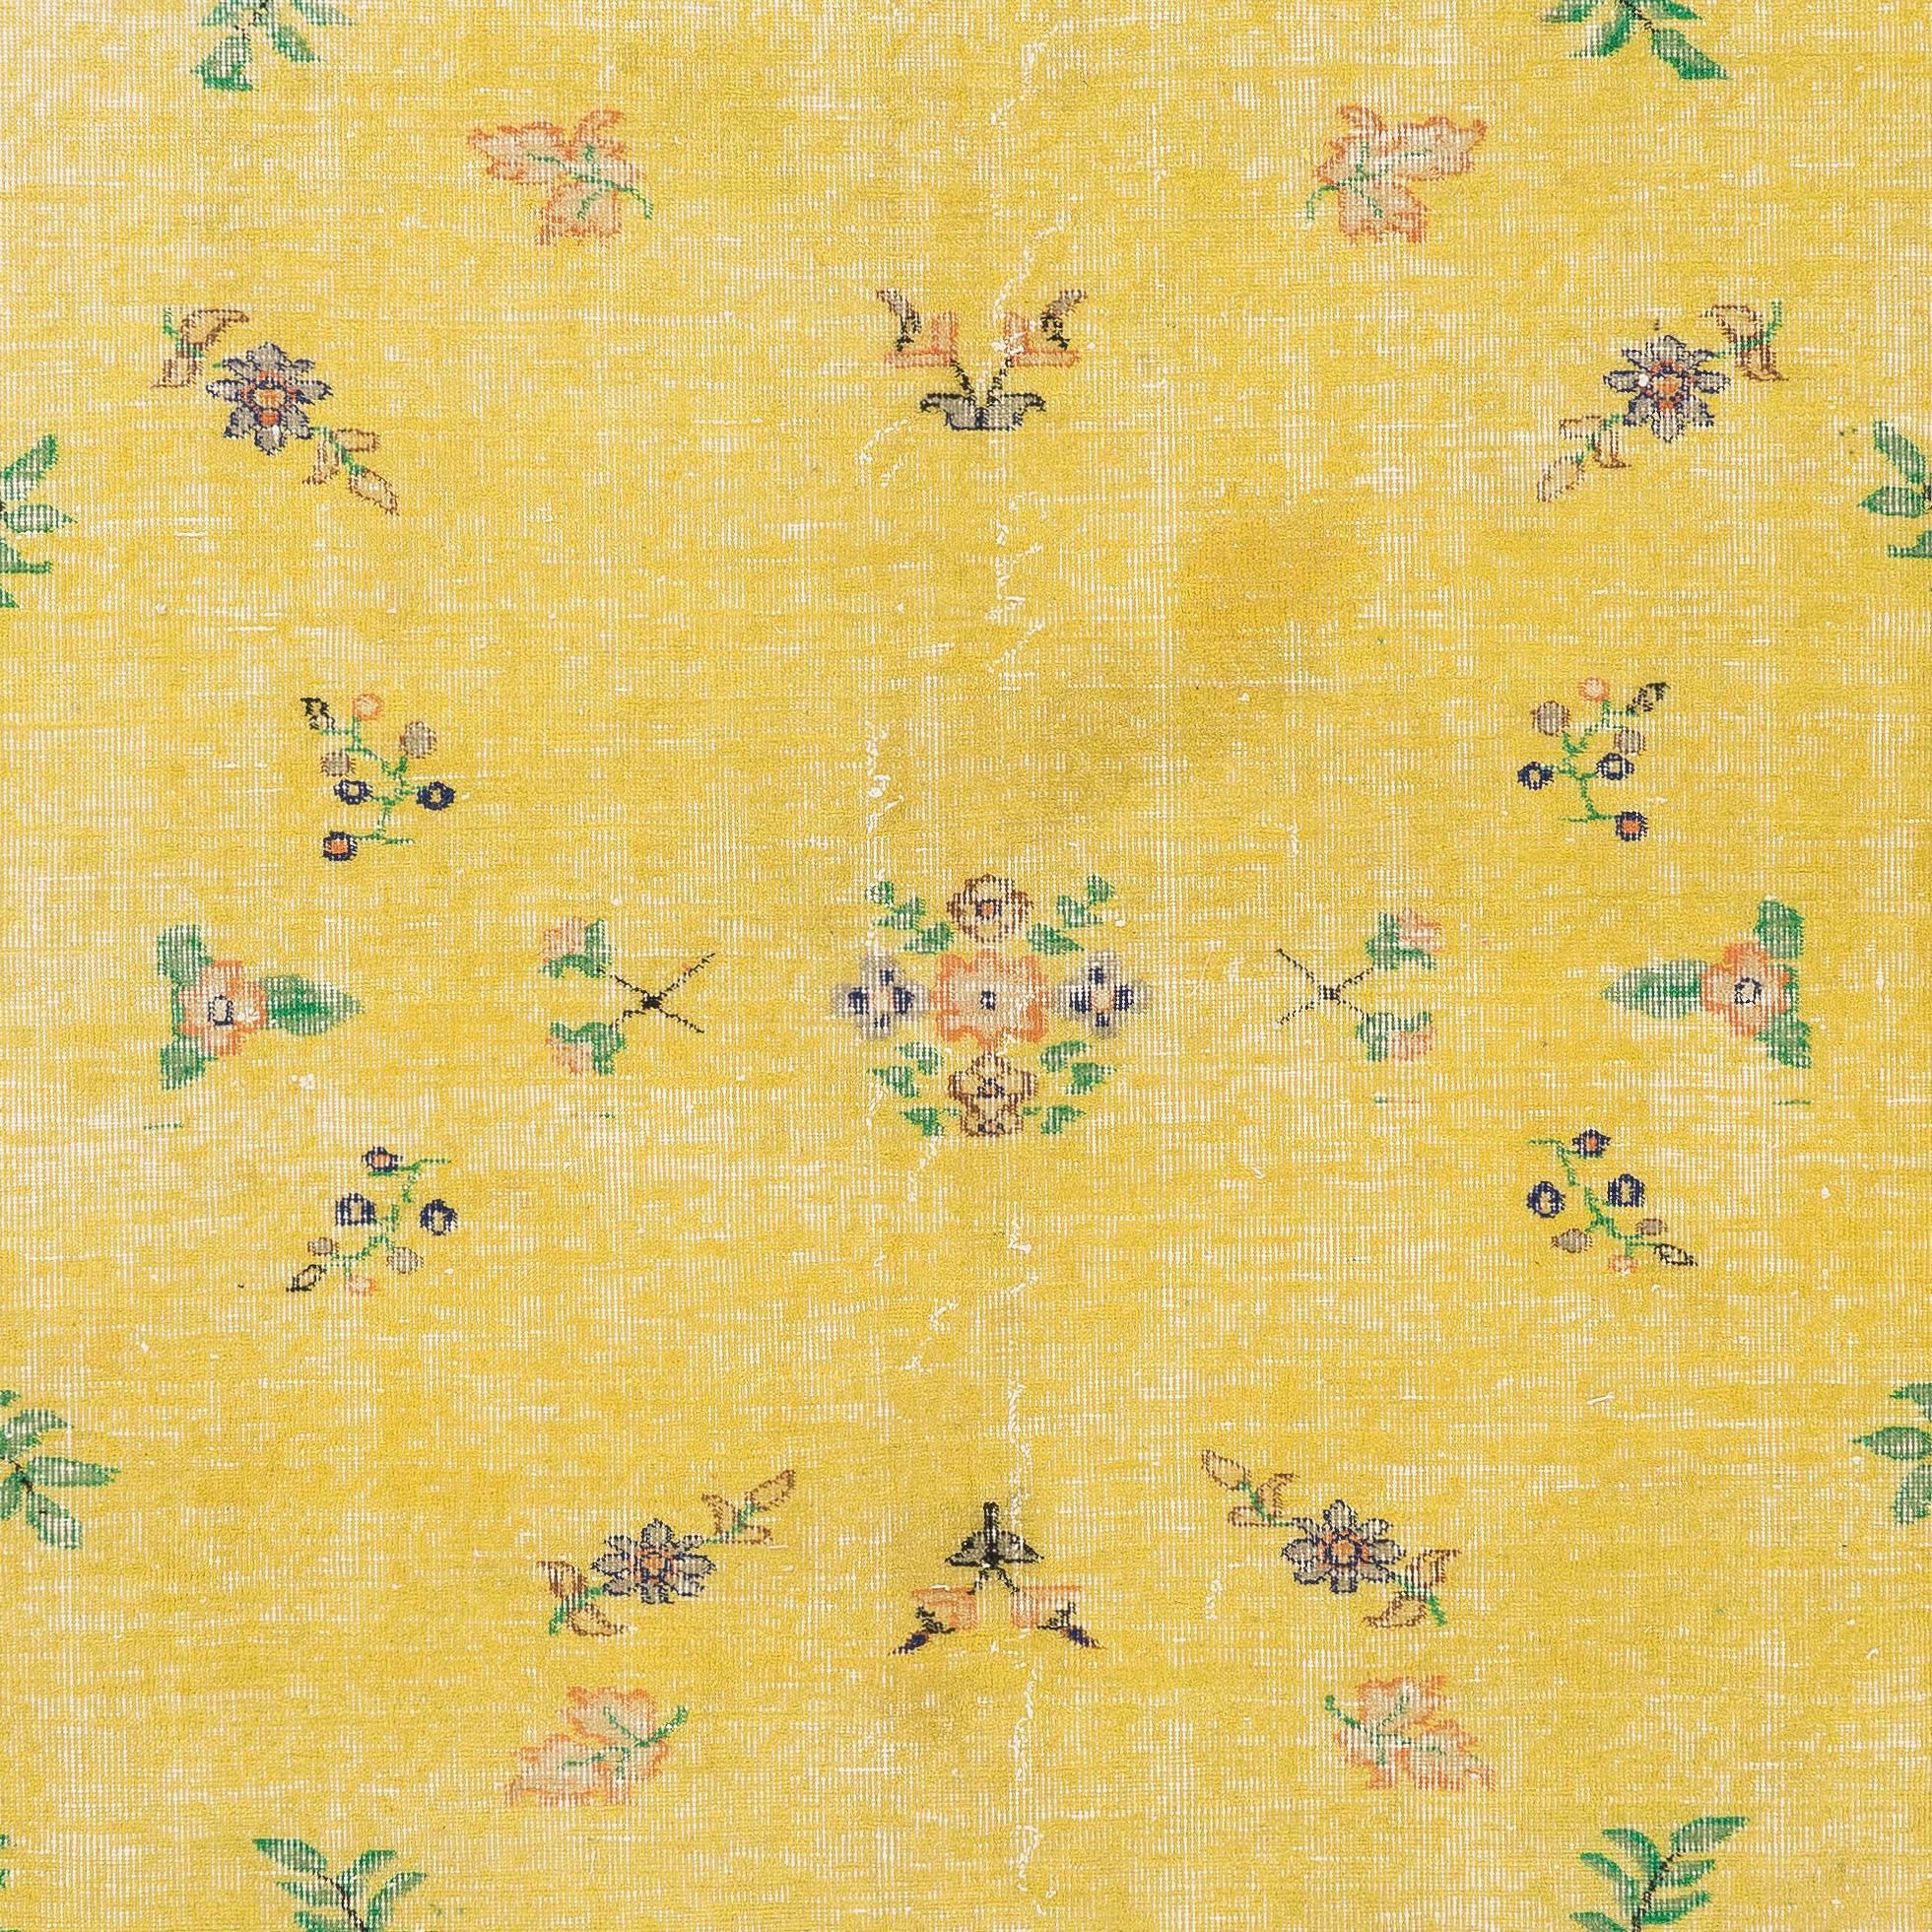 Hand-Knotted Exquisite Turkish Deco Rug in Canary Yellow Color